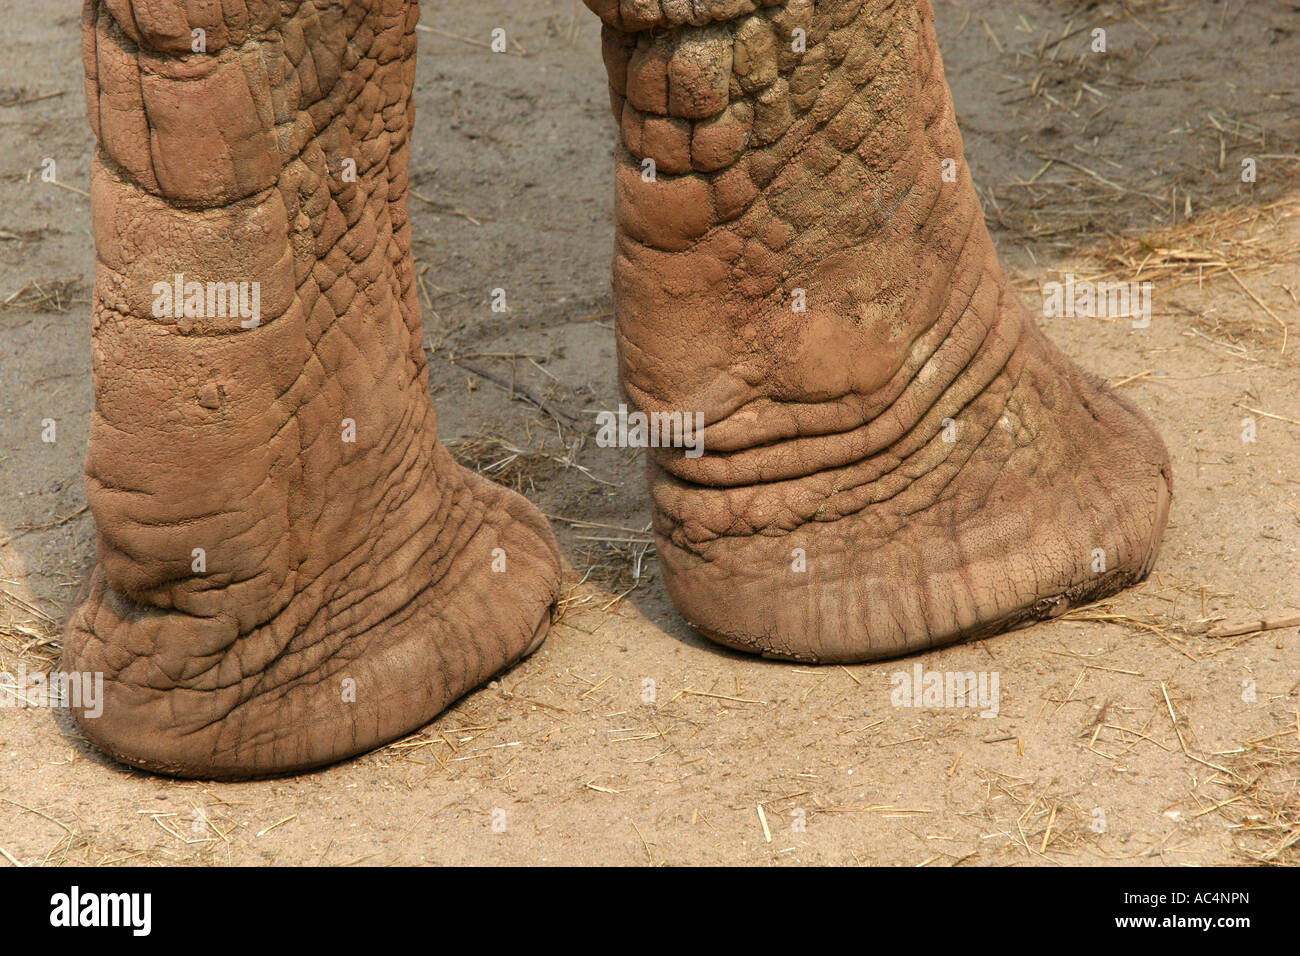 Closeup of the brown creased wrinkly leathery weathered skin and front legs of a fully grown adult African Elephant in captivity Stock Photo